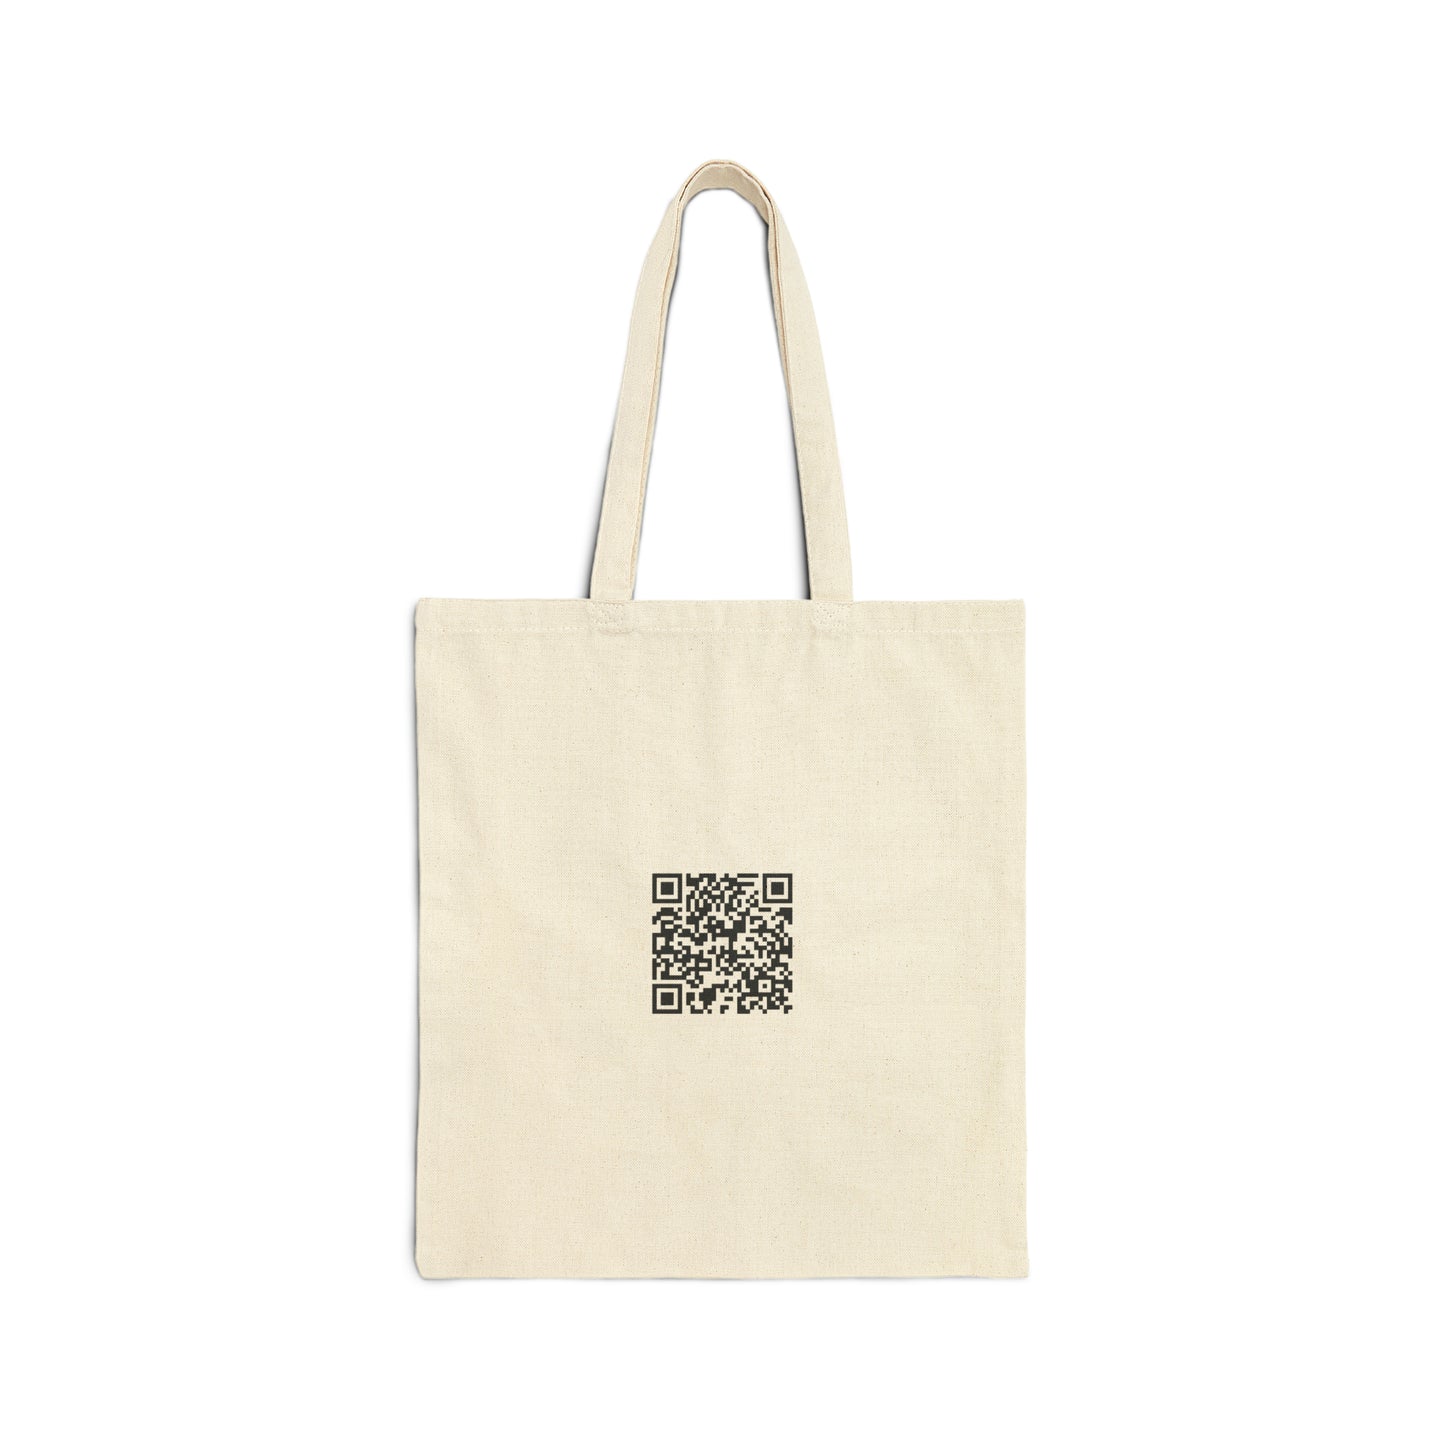 The Moon - Cotton Canvas Tote Bag